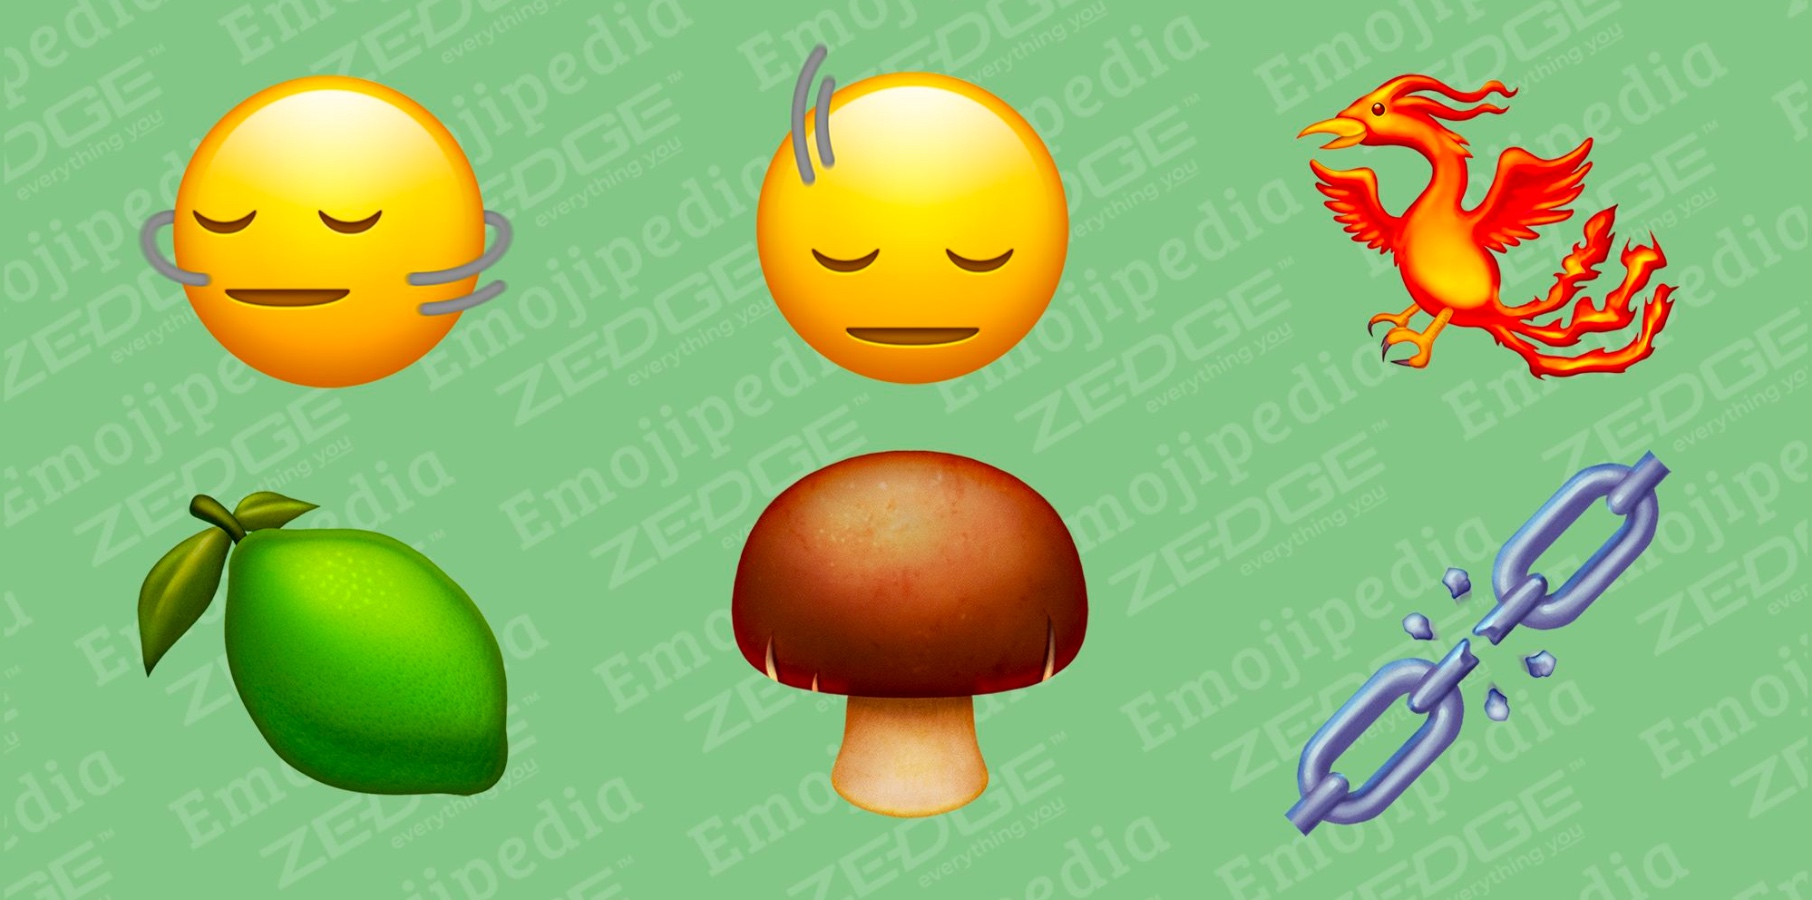 iOS 17 could add more than 100 new emojis to your iPhone next year